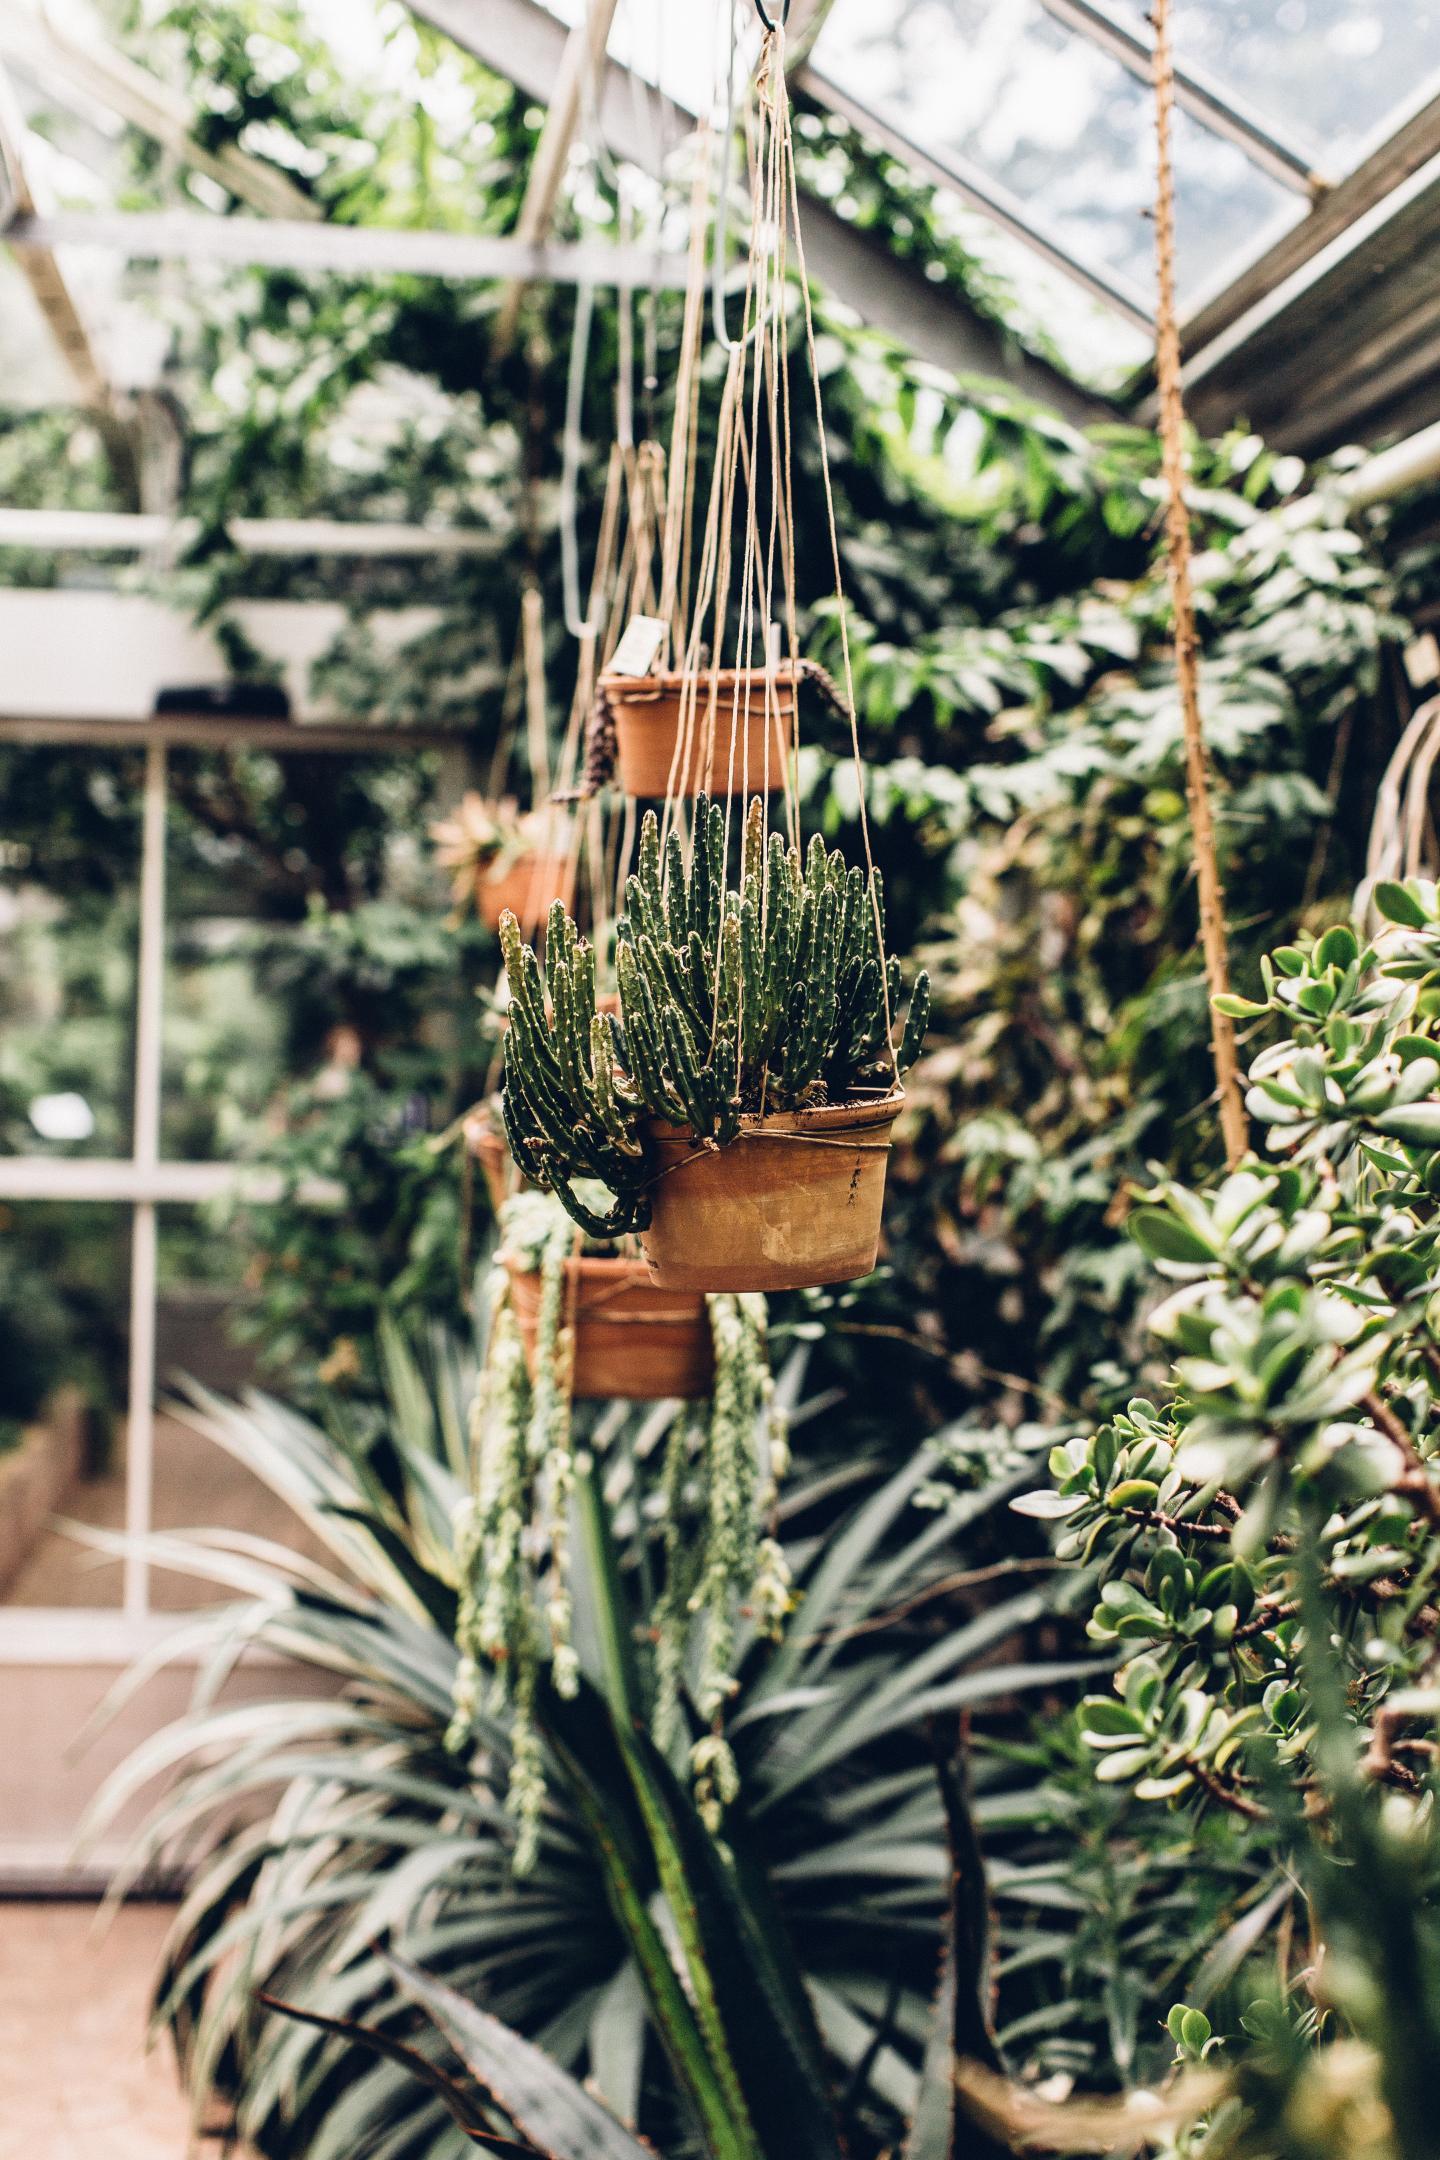 Botanical garden with hanging plants